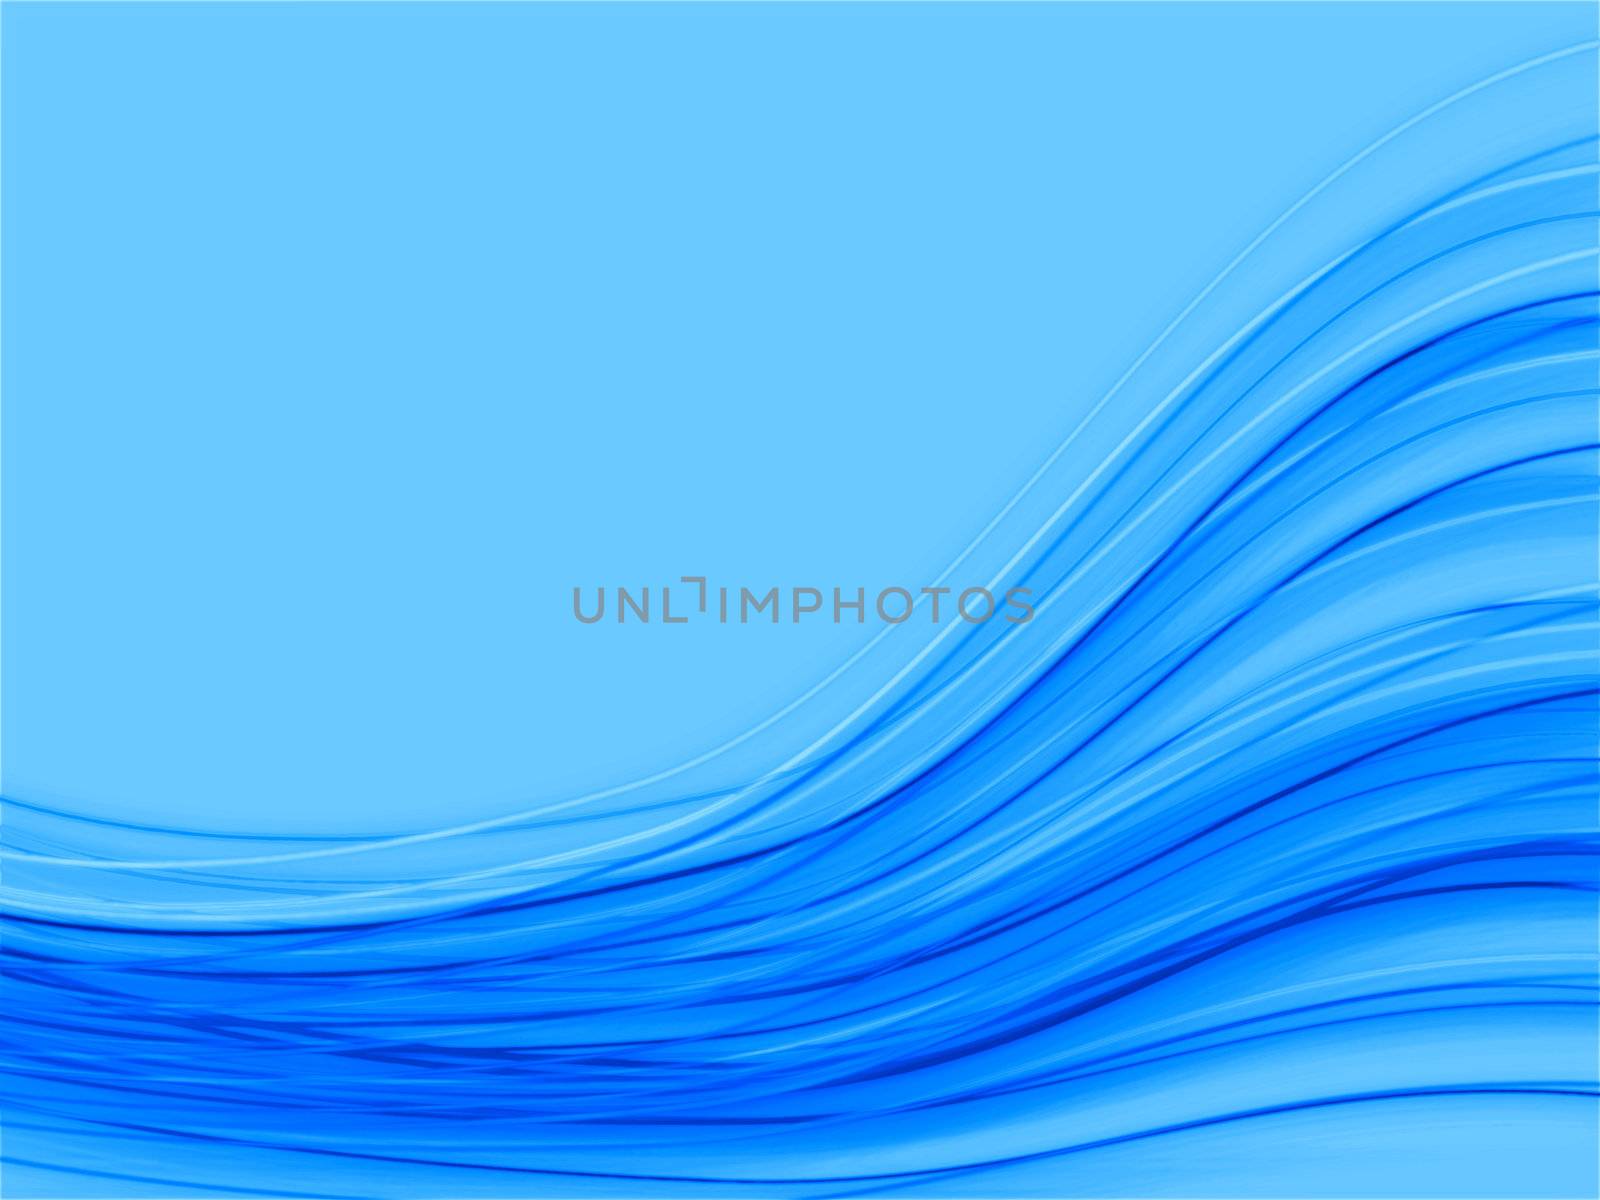 Abstract waved background with many light blue lines